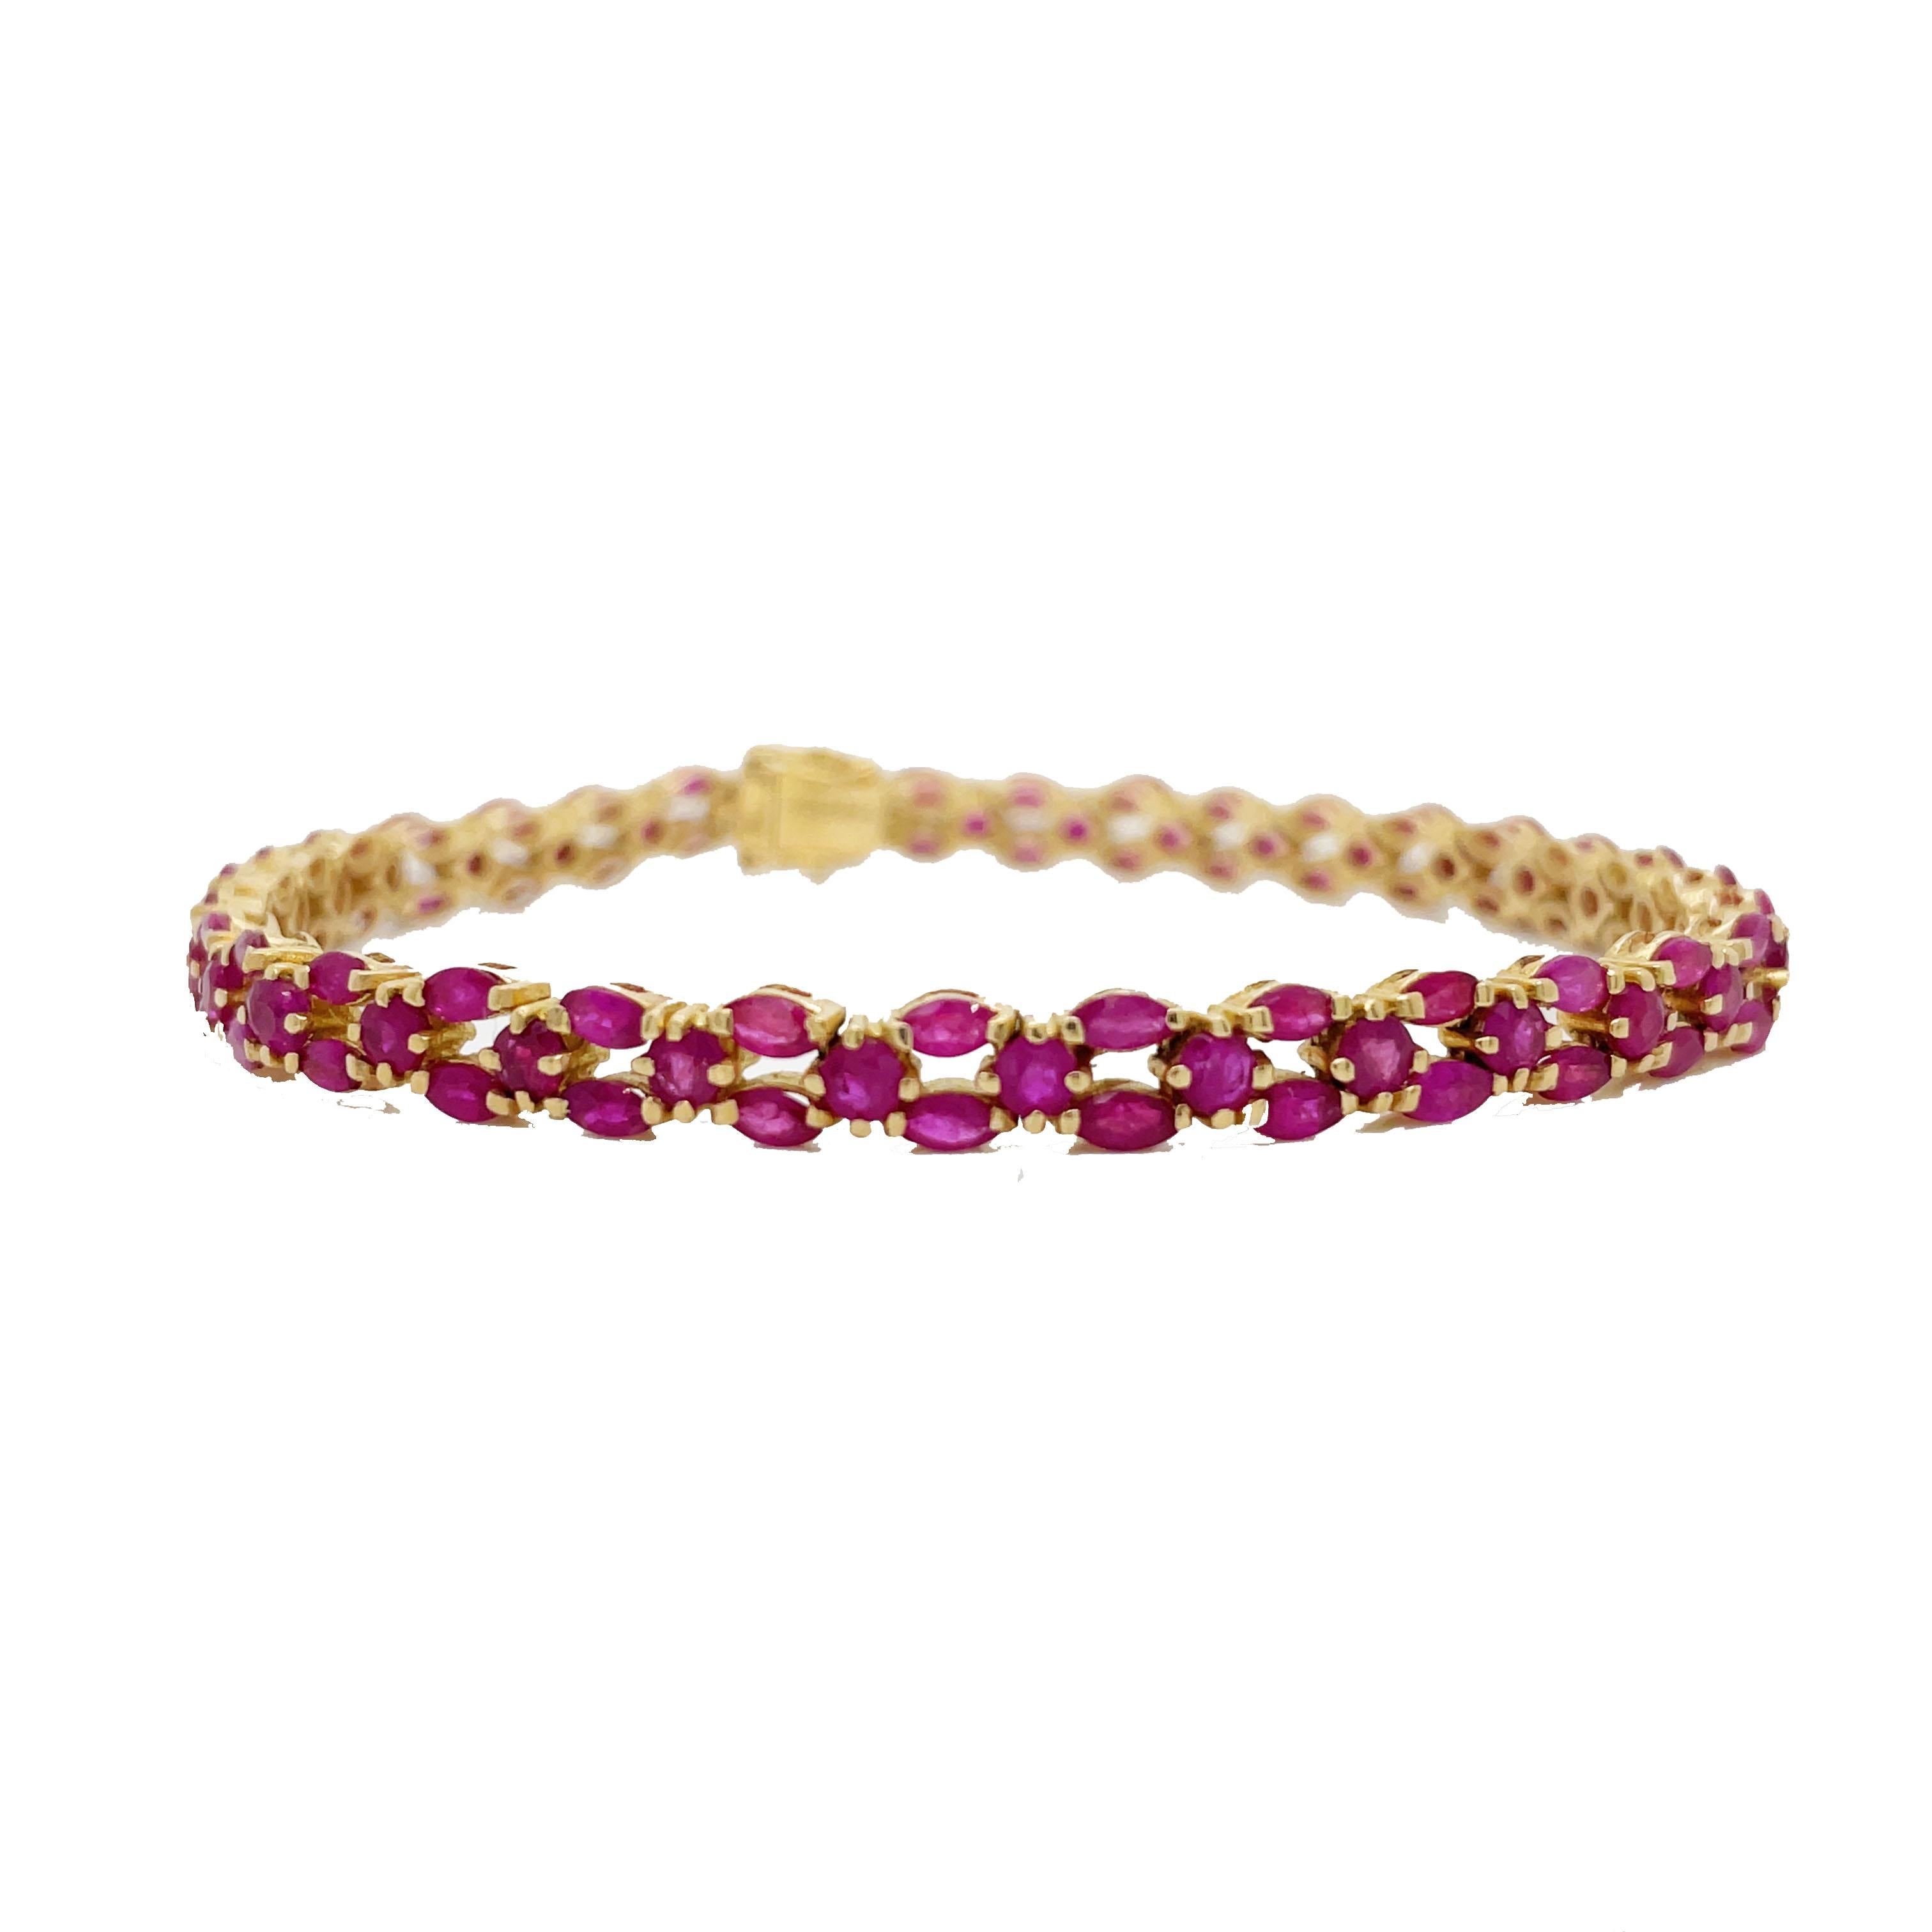 This is a lovely Contemporary tennis bracelet crafted in 18K Yellow gold adorned with bright and vibrant rubies! In this chic, refined, and gorgeous Contemporary jewel, a captivating array of bright rubies - set by yellow gold prongs - gleam from